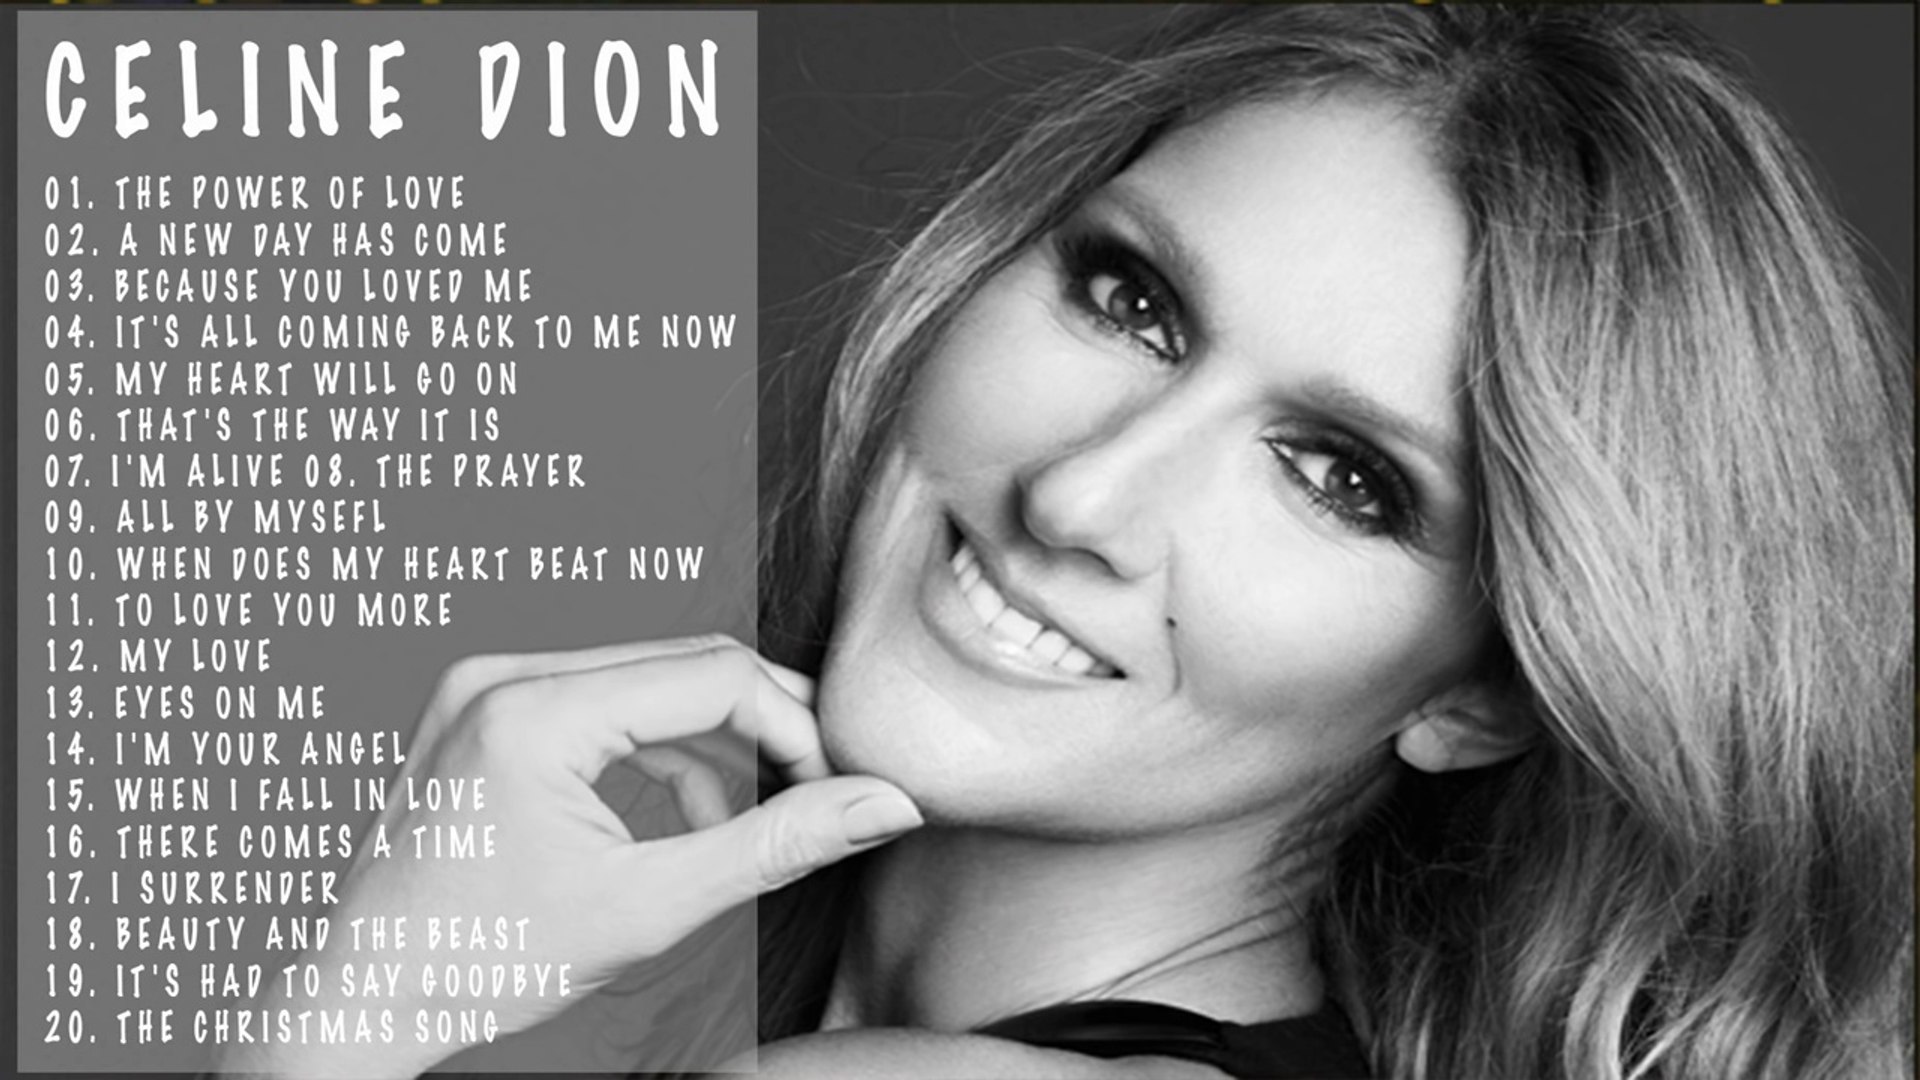 Celine Dion Greatest Hits Full Album 2015 30 Biggest Songs Of Celine Dion Video Dailymotion